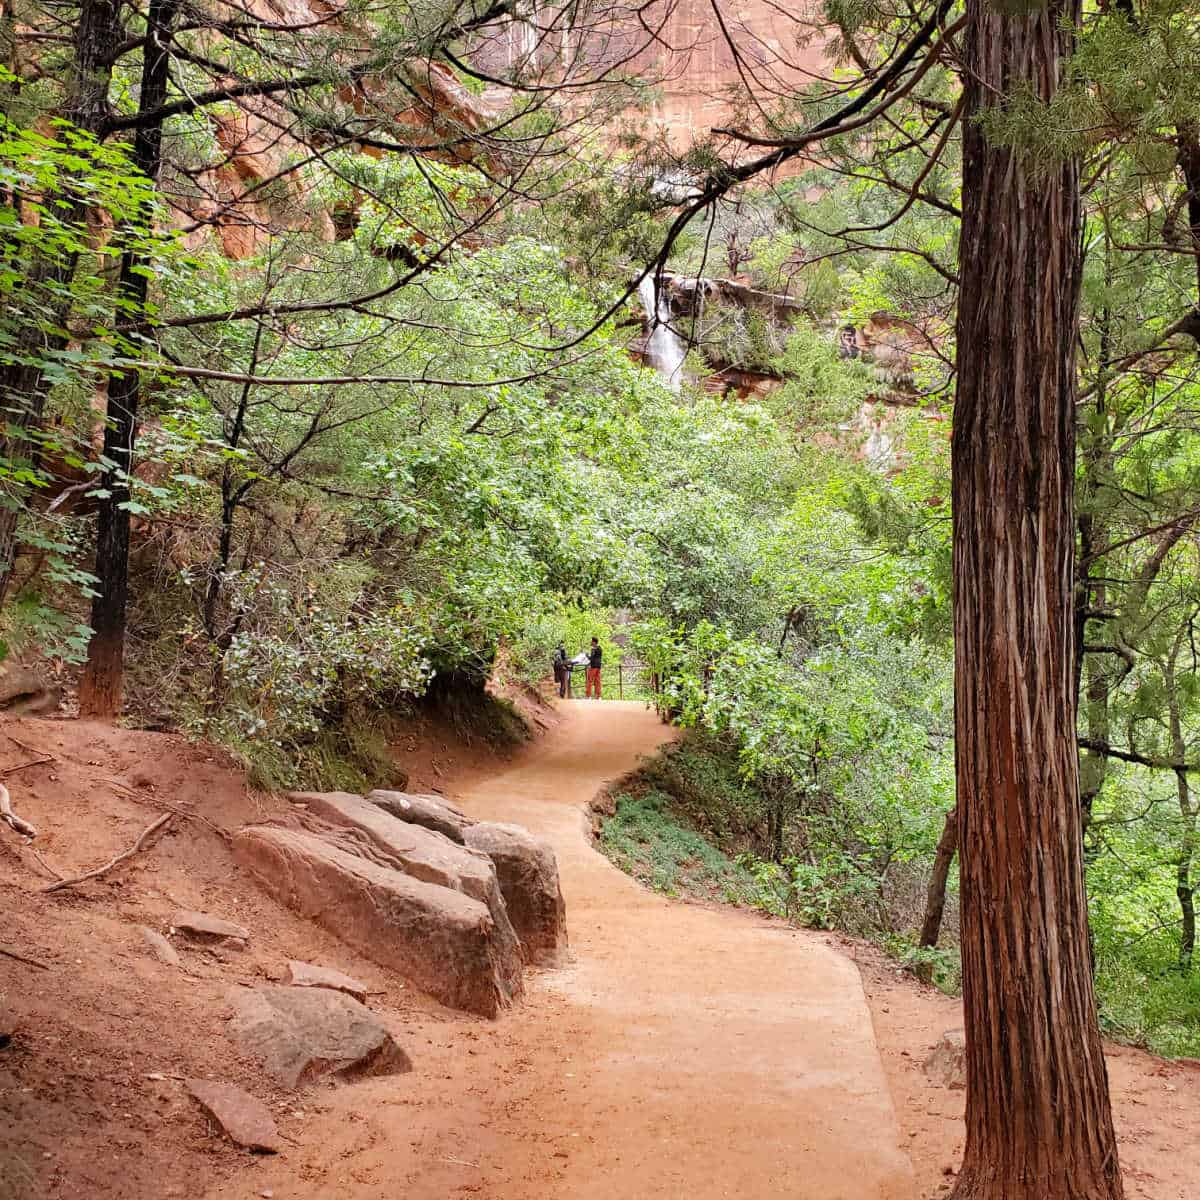 Closr to Lower Emerald Pool at Zion National Park